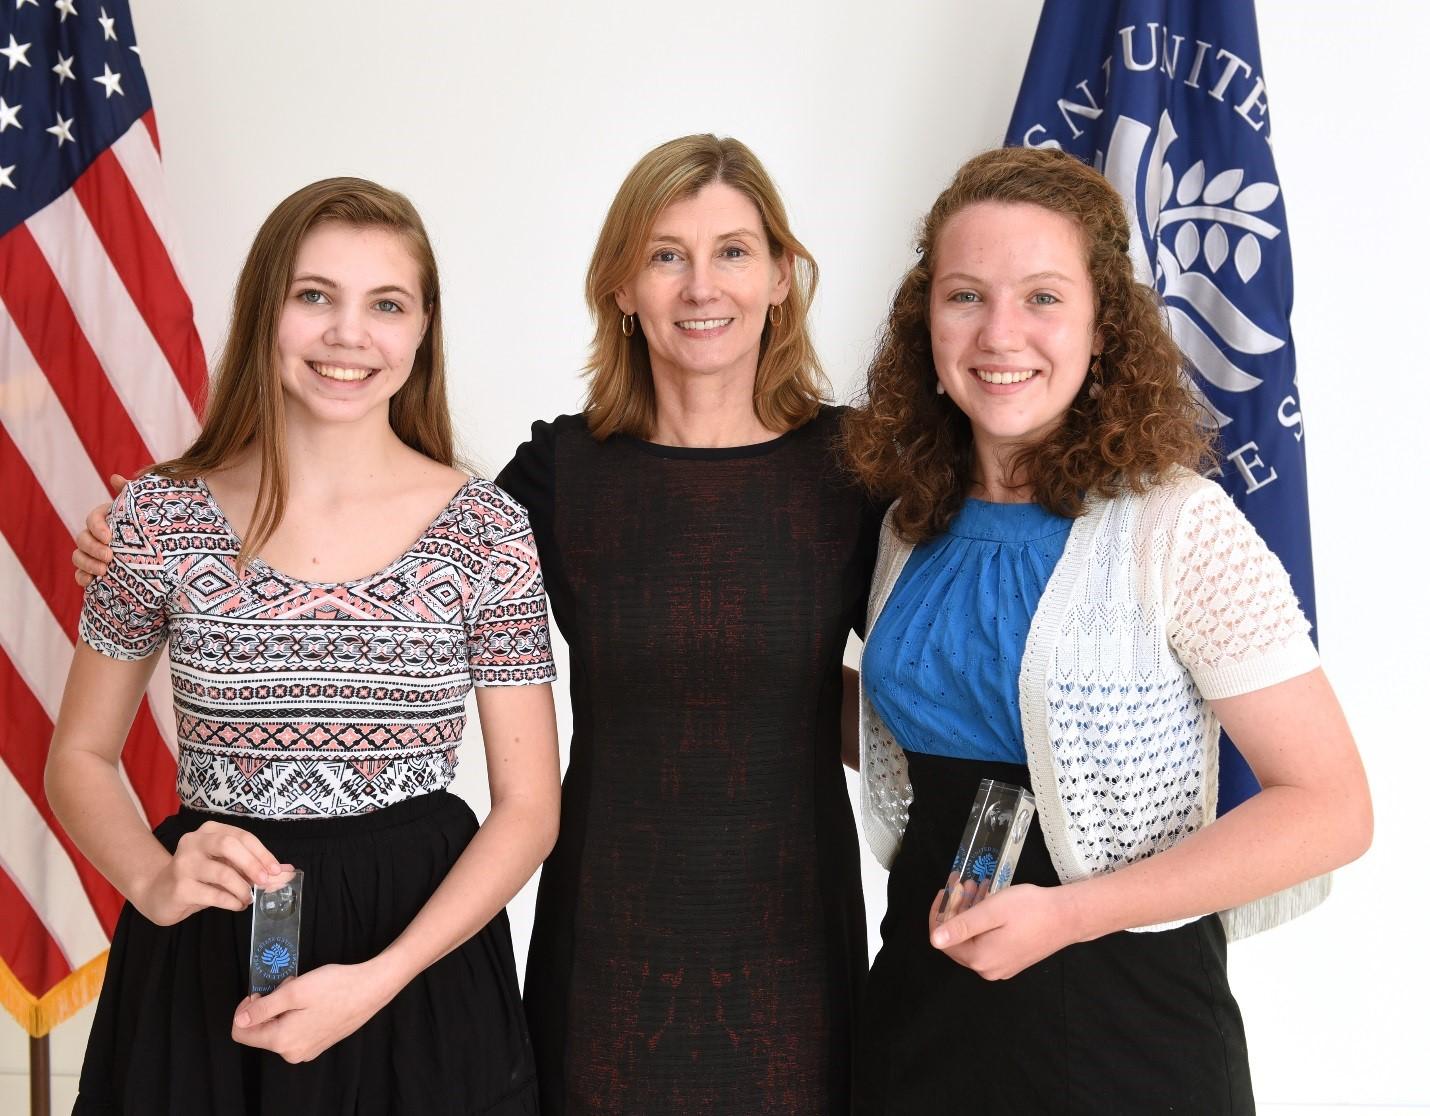 National History Day 2015 USIP Special Award Junior Division winner Kailyn Noble (left) and Senior Division winner Marie Laverdiere (right) with President Nancy Lindborg